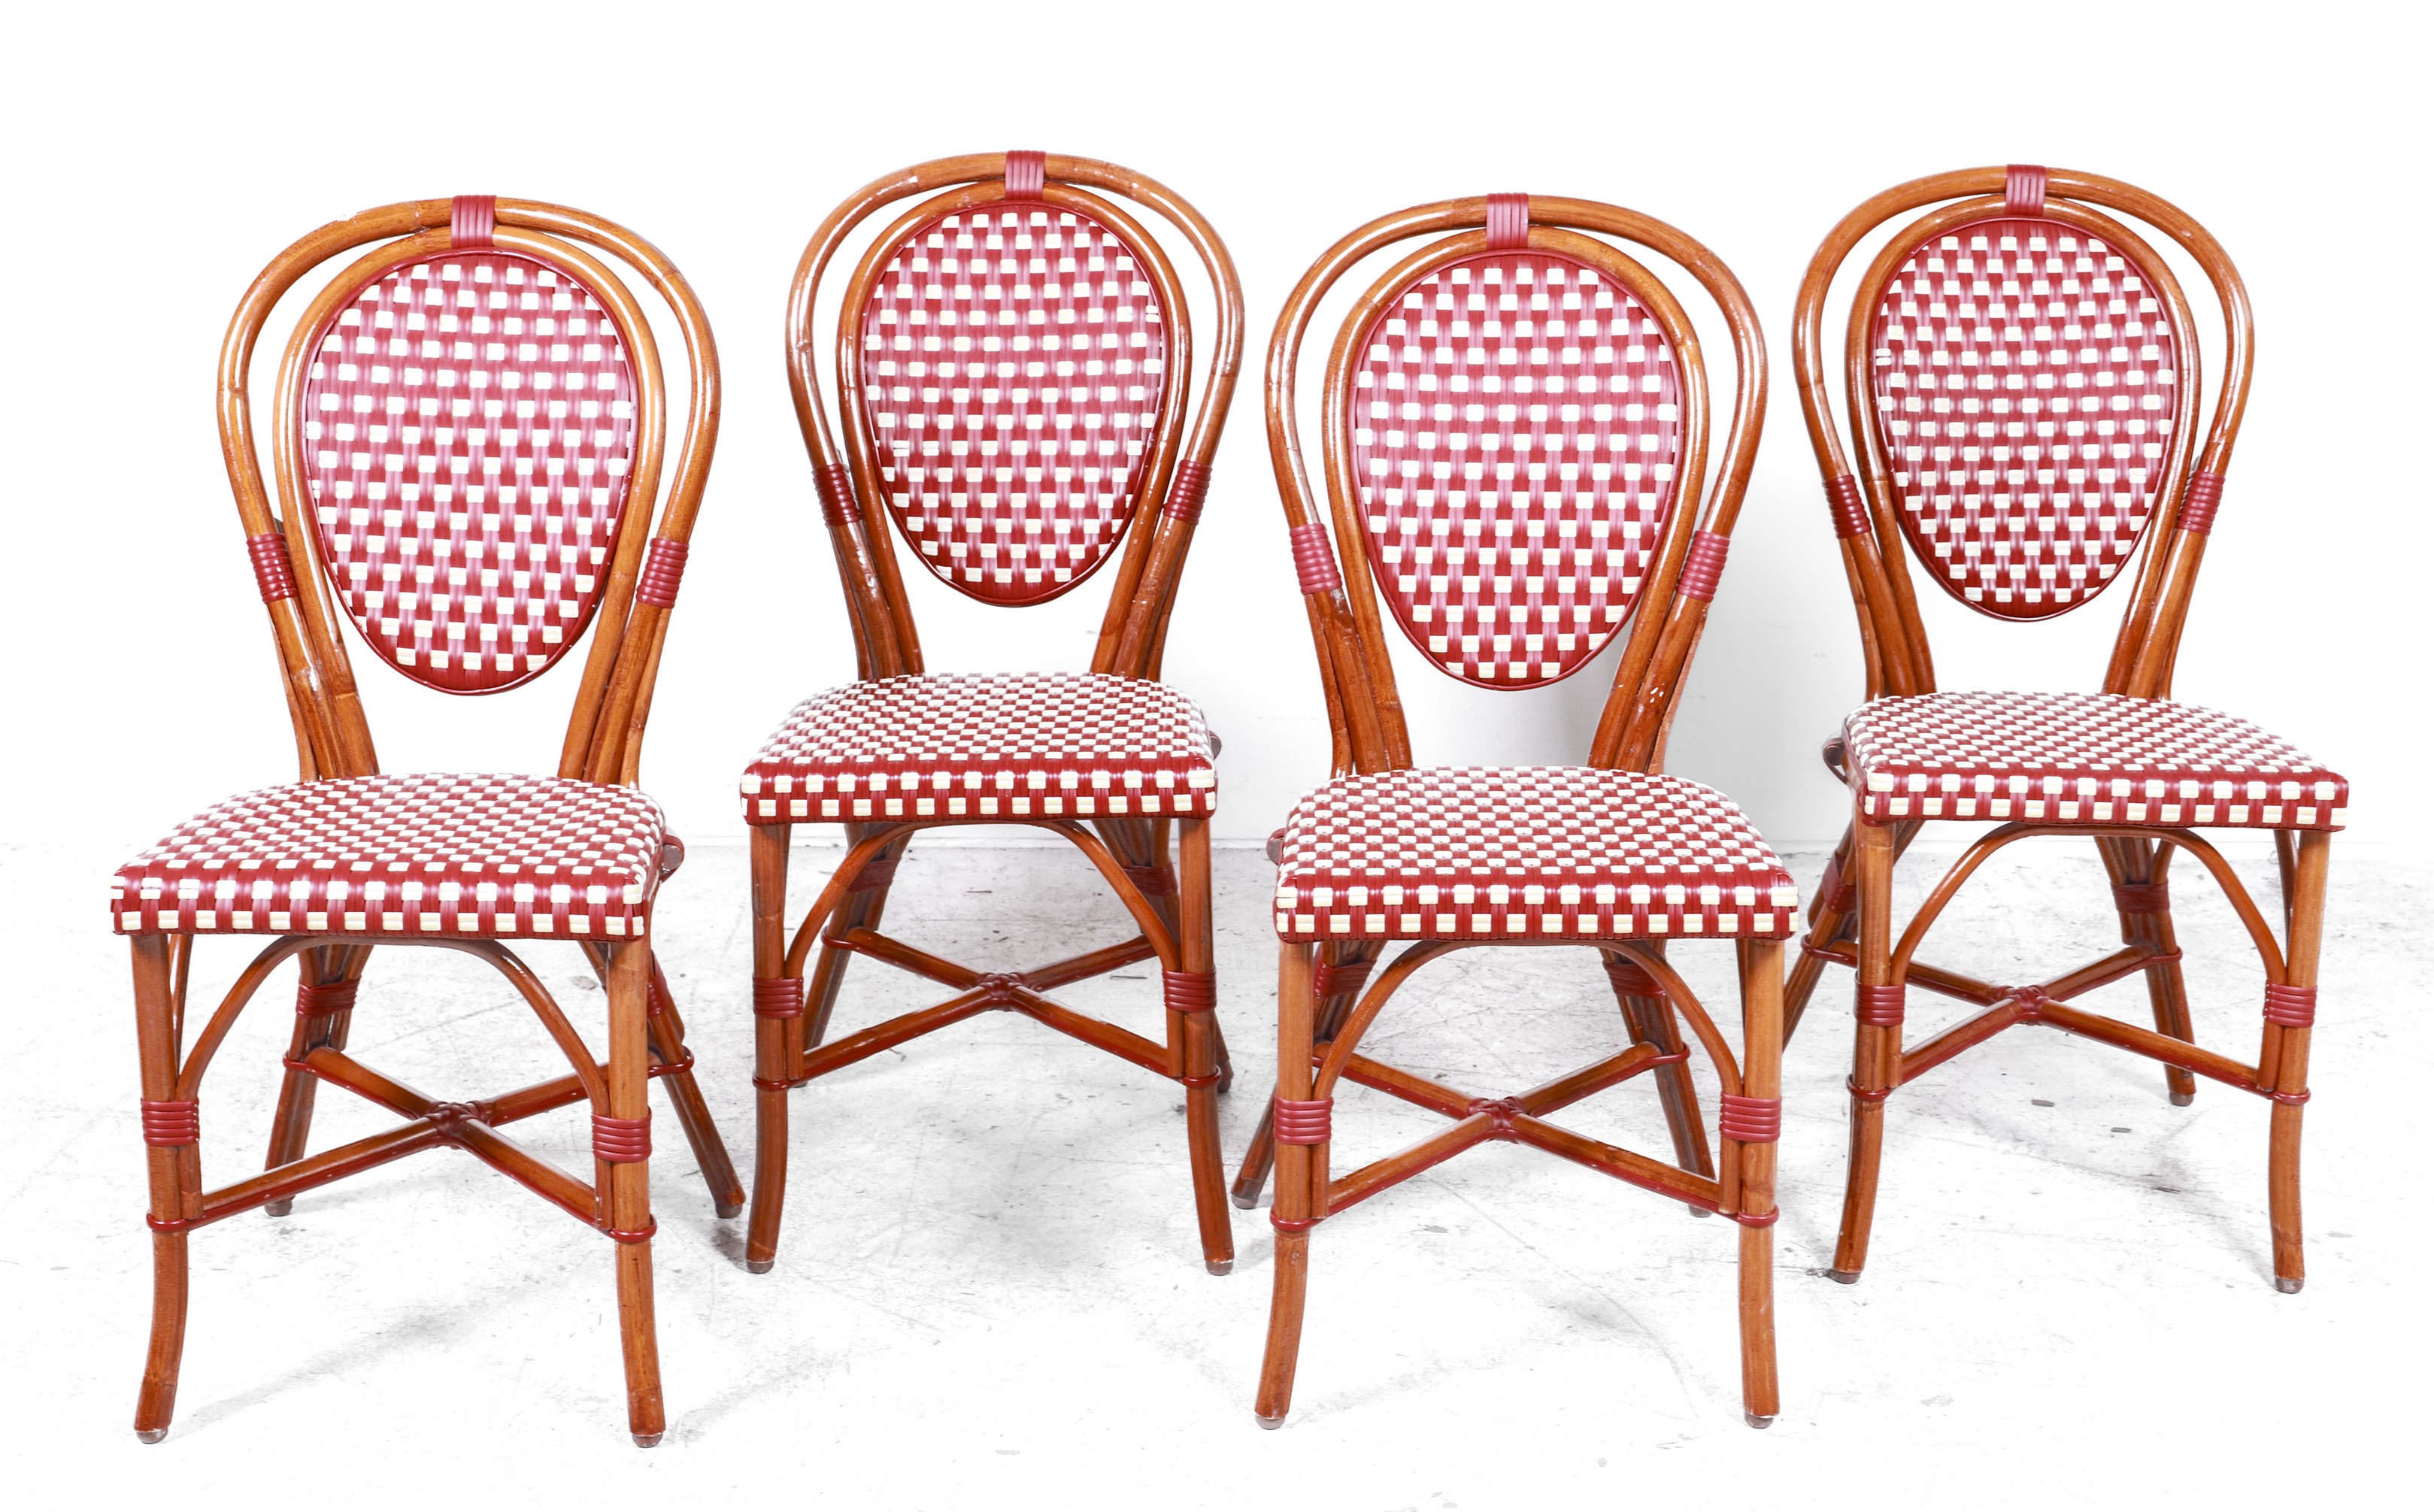  4 Poitoux Glac Seat side chairs  3b5d86